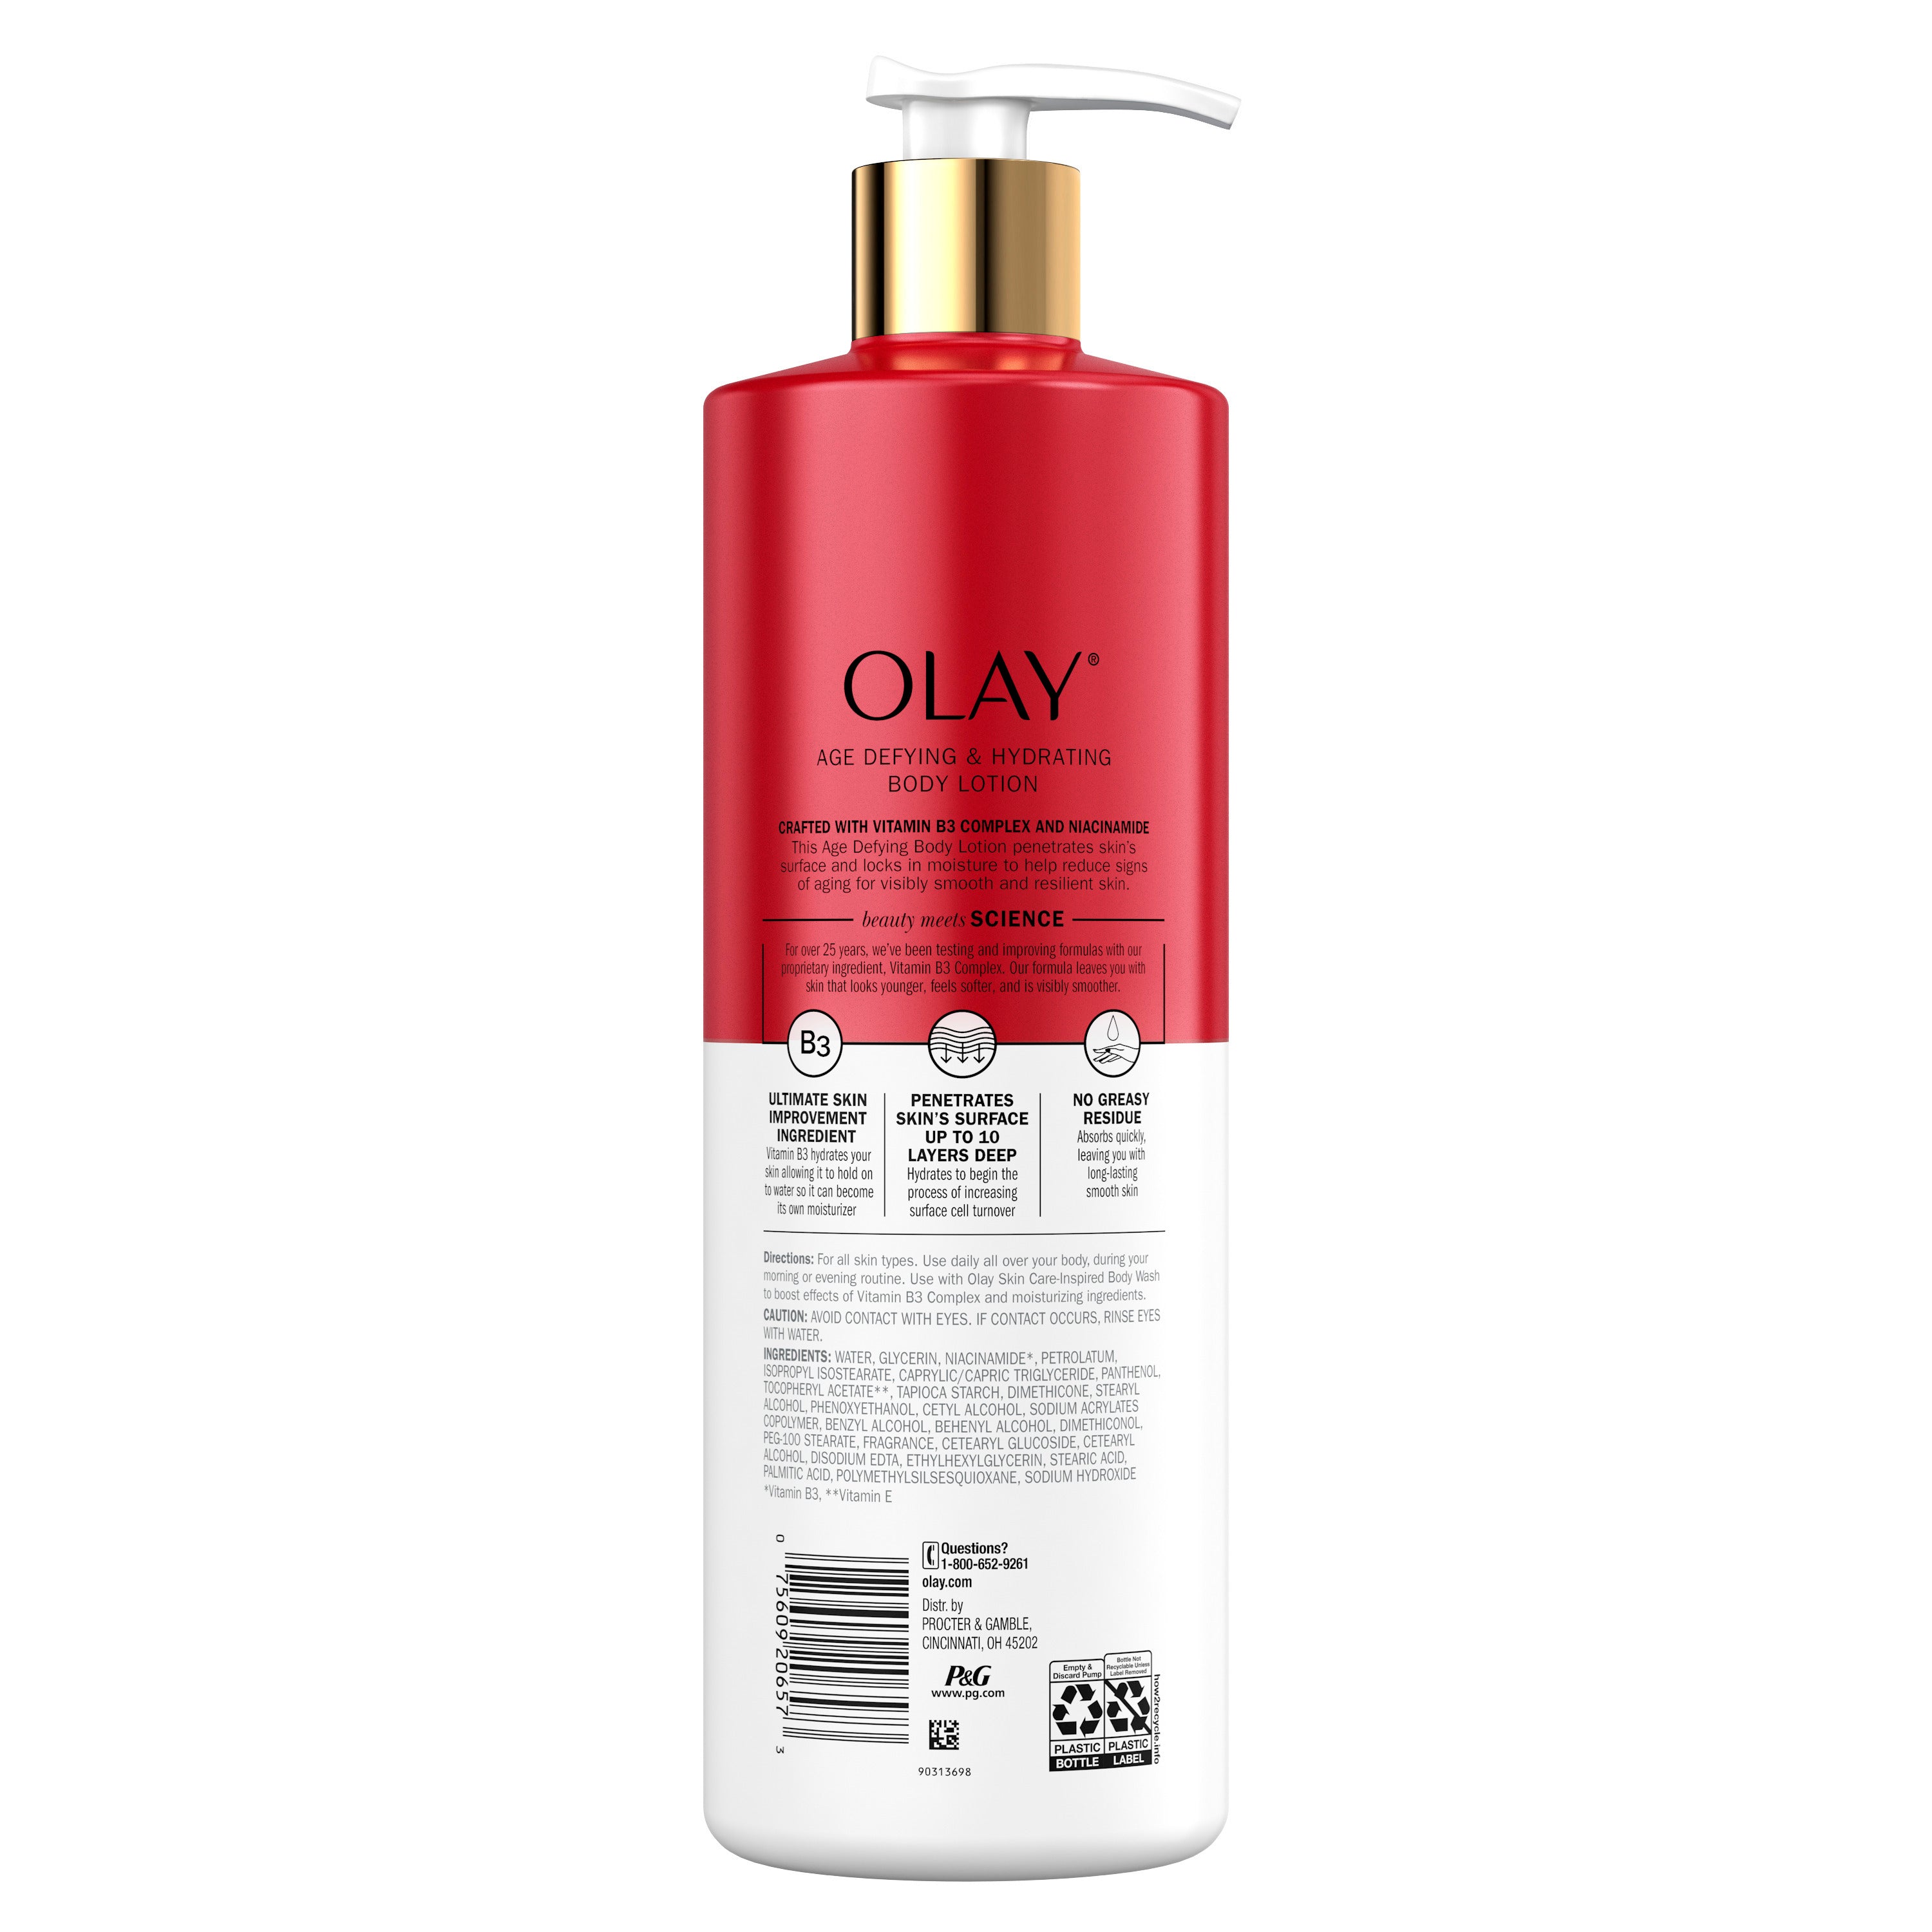 Olay Age Defying & Hydrating Niacinamide Hand and Body Lotion 17 fl oz. | MTTS307